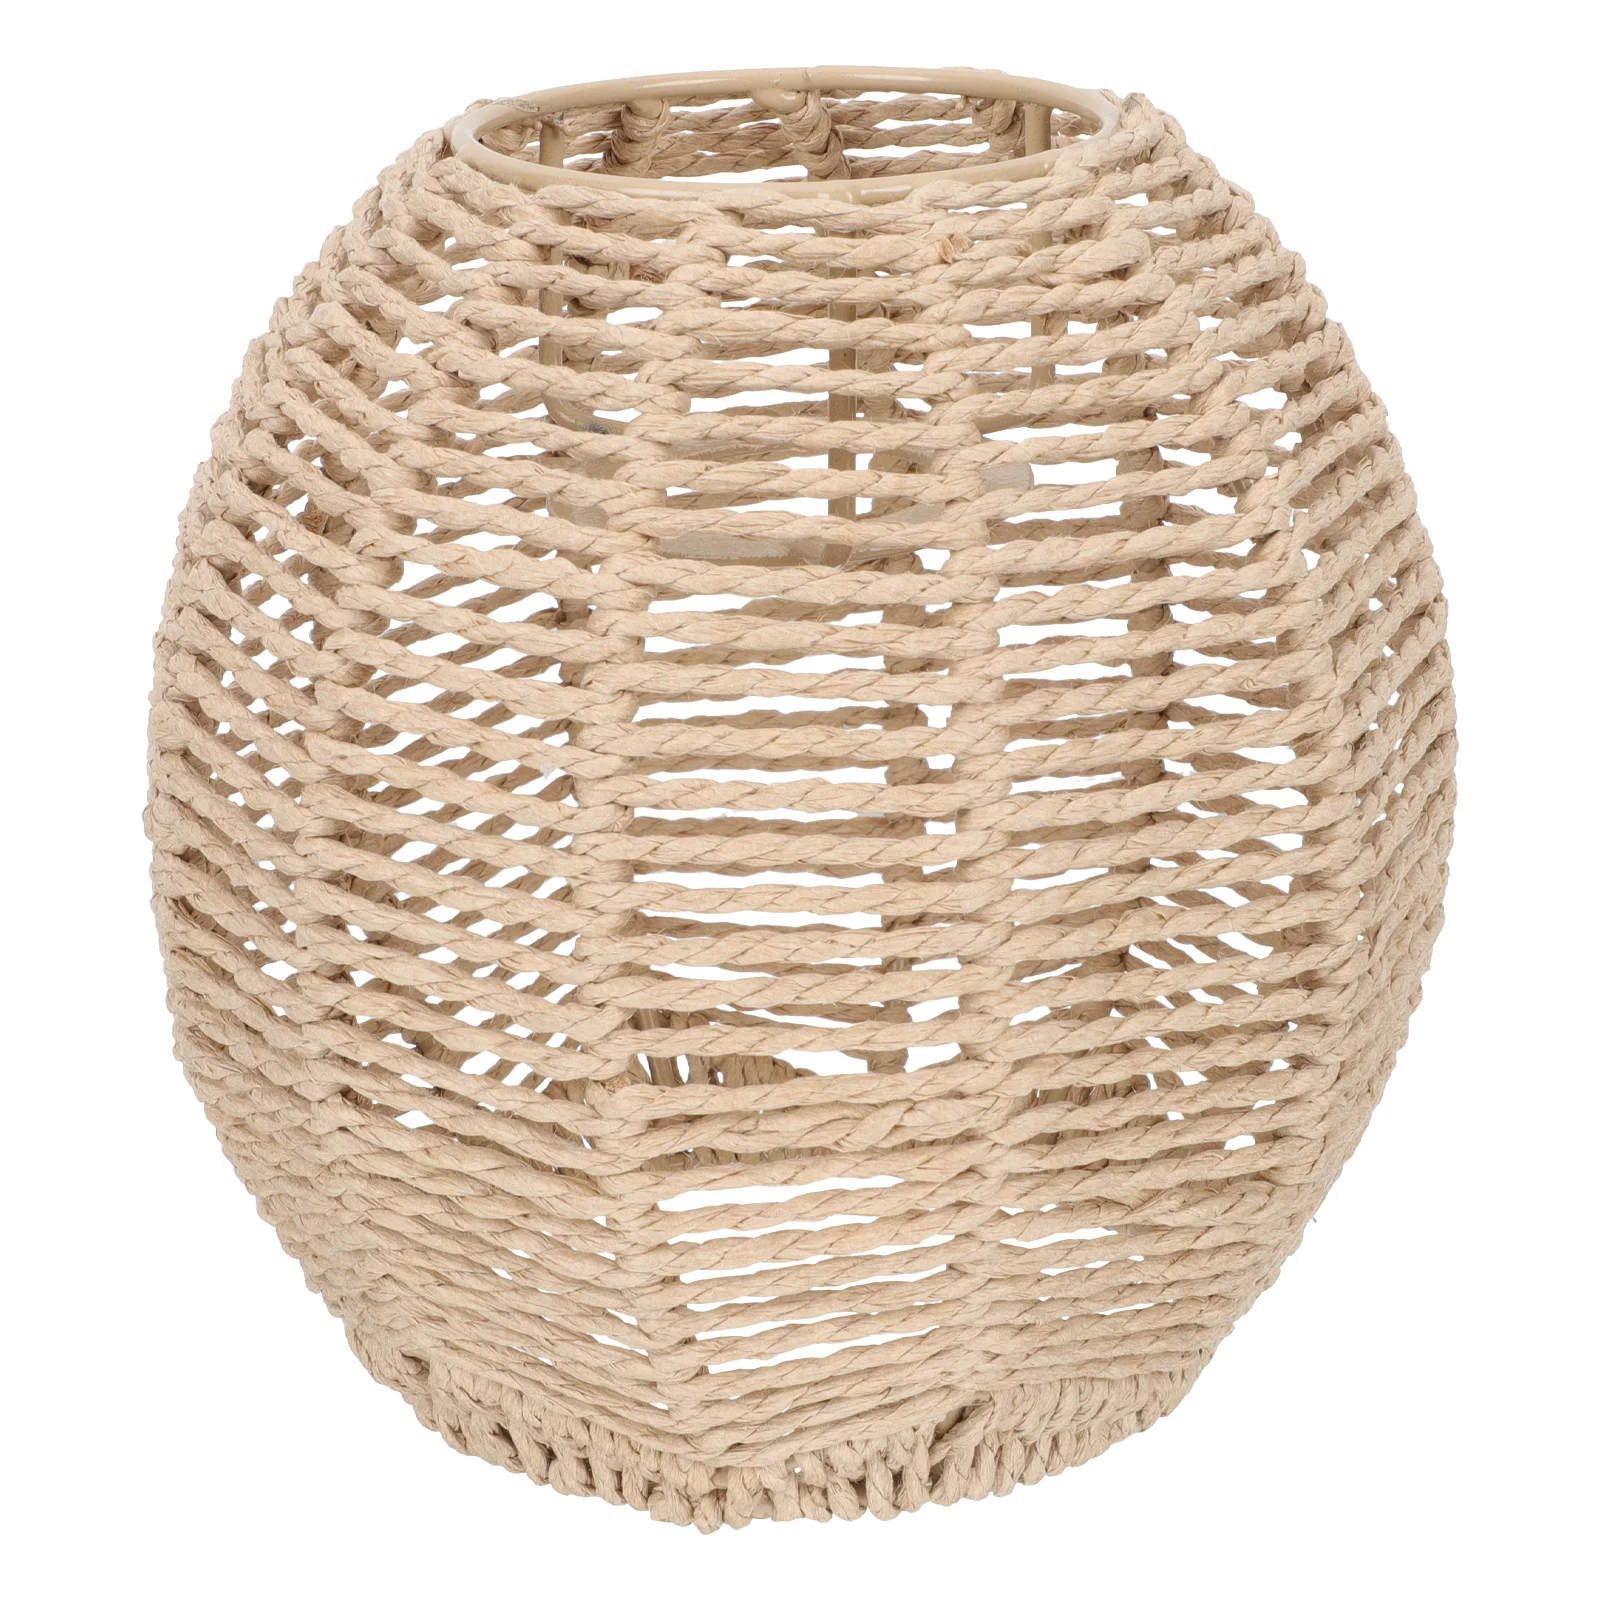 

Lamp Light Lampshade Shade Pendant Rattan Cover Hanging Woven Wicker Rope Home Bar Hotel Style Lights Fixture Shades